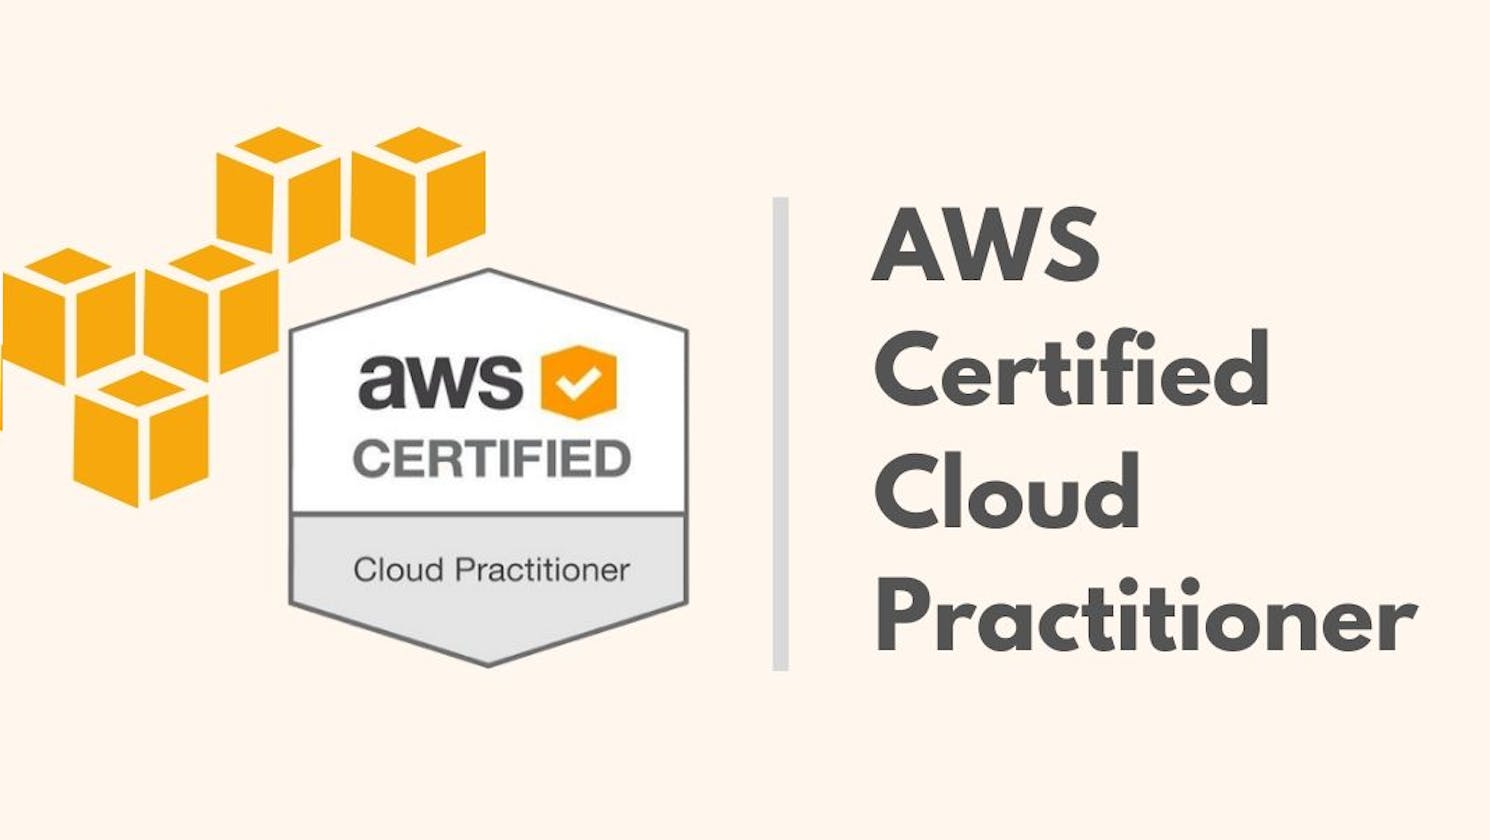 How I became an AWS Certified Cloud Practitioner?